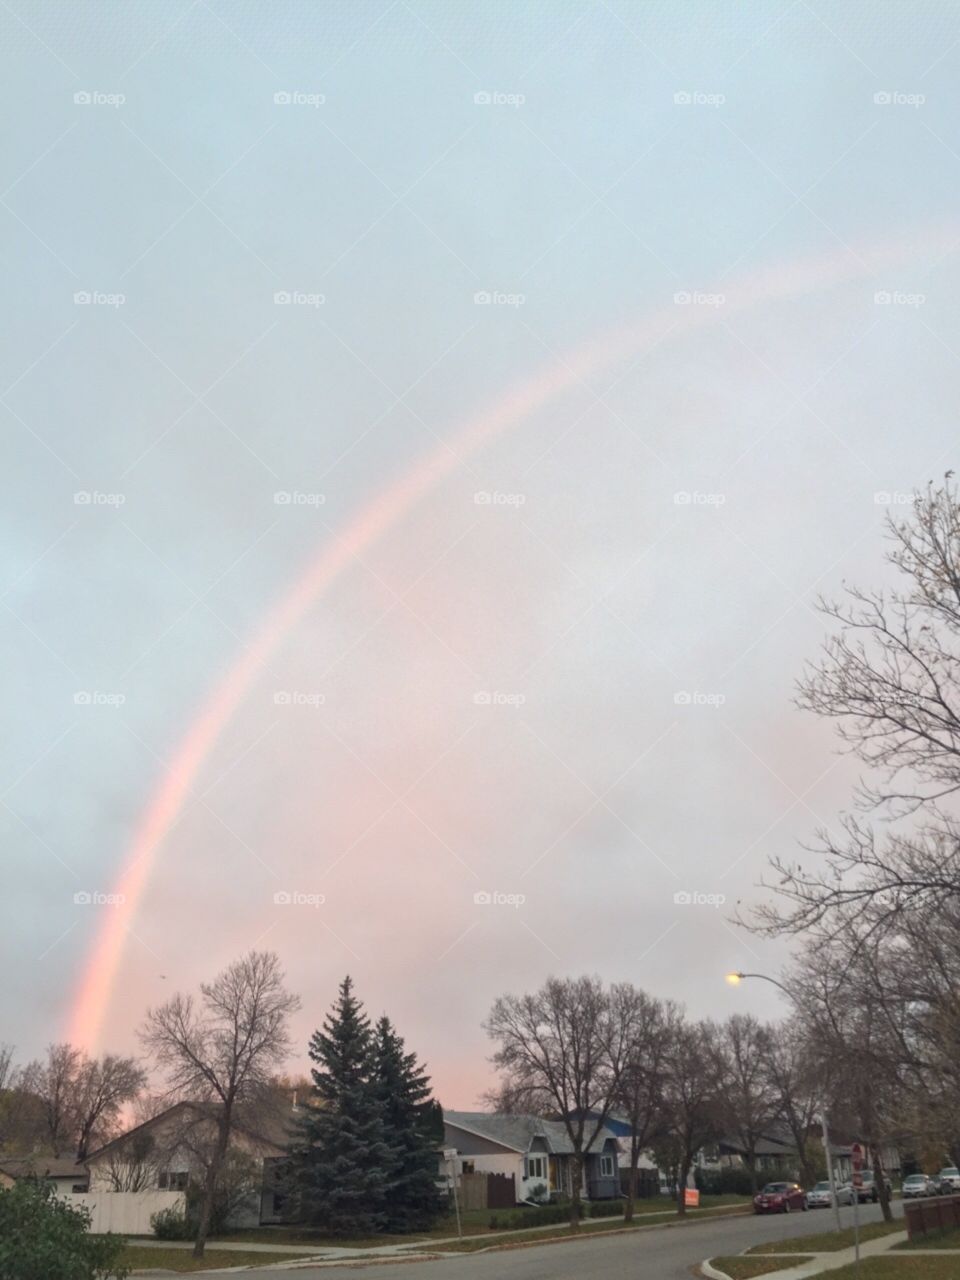 Thankful 4 rainbows. Rainbow appeared after family dinner on Thanksgiving day 2015 that encompassed the entire sky.